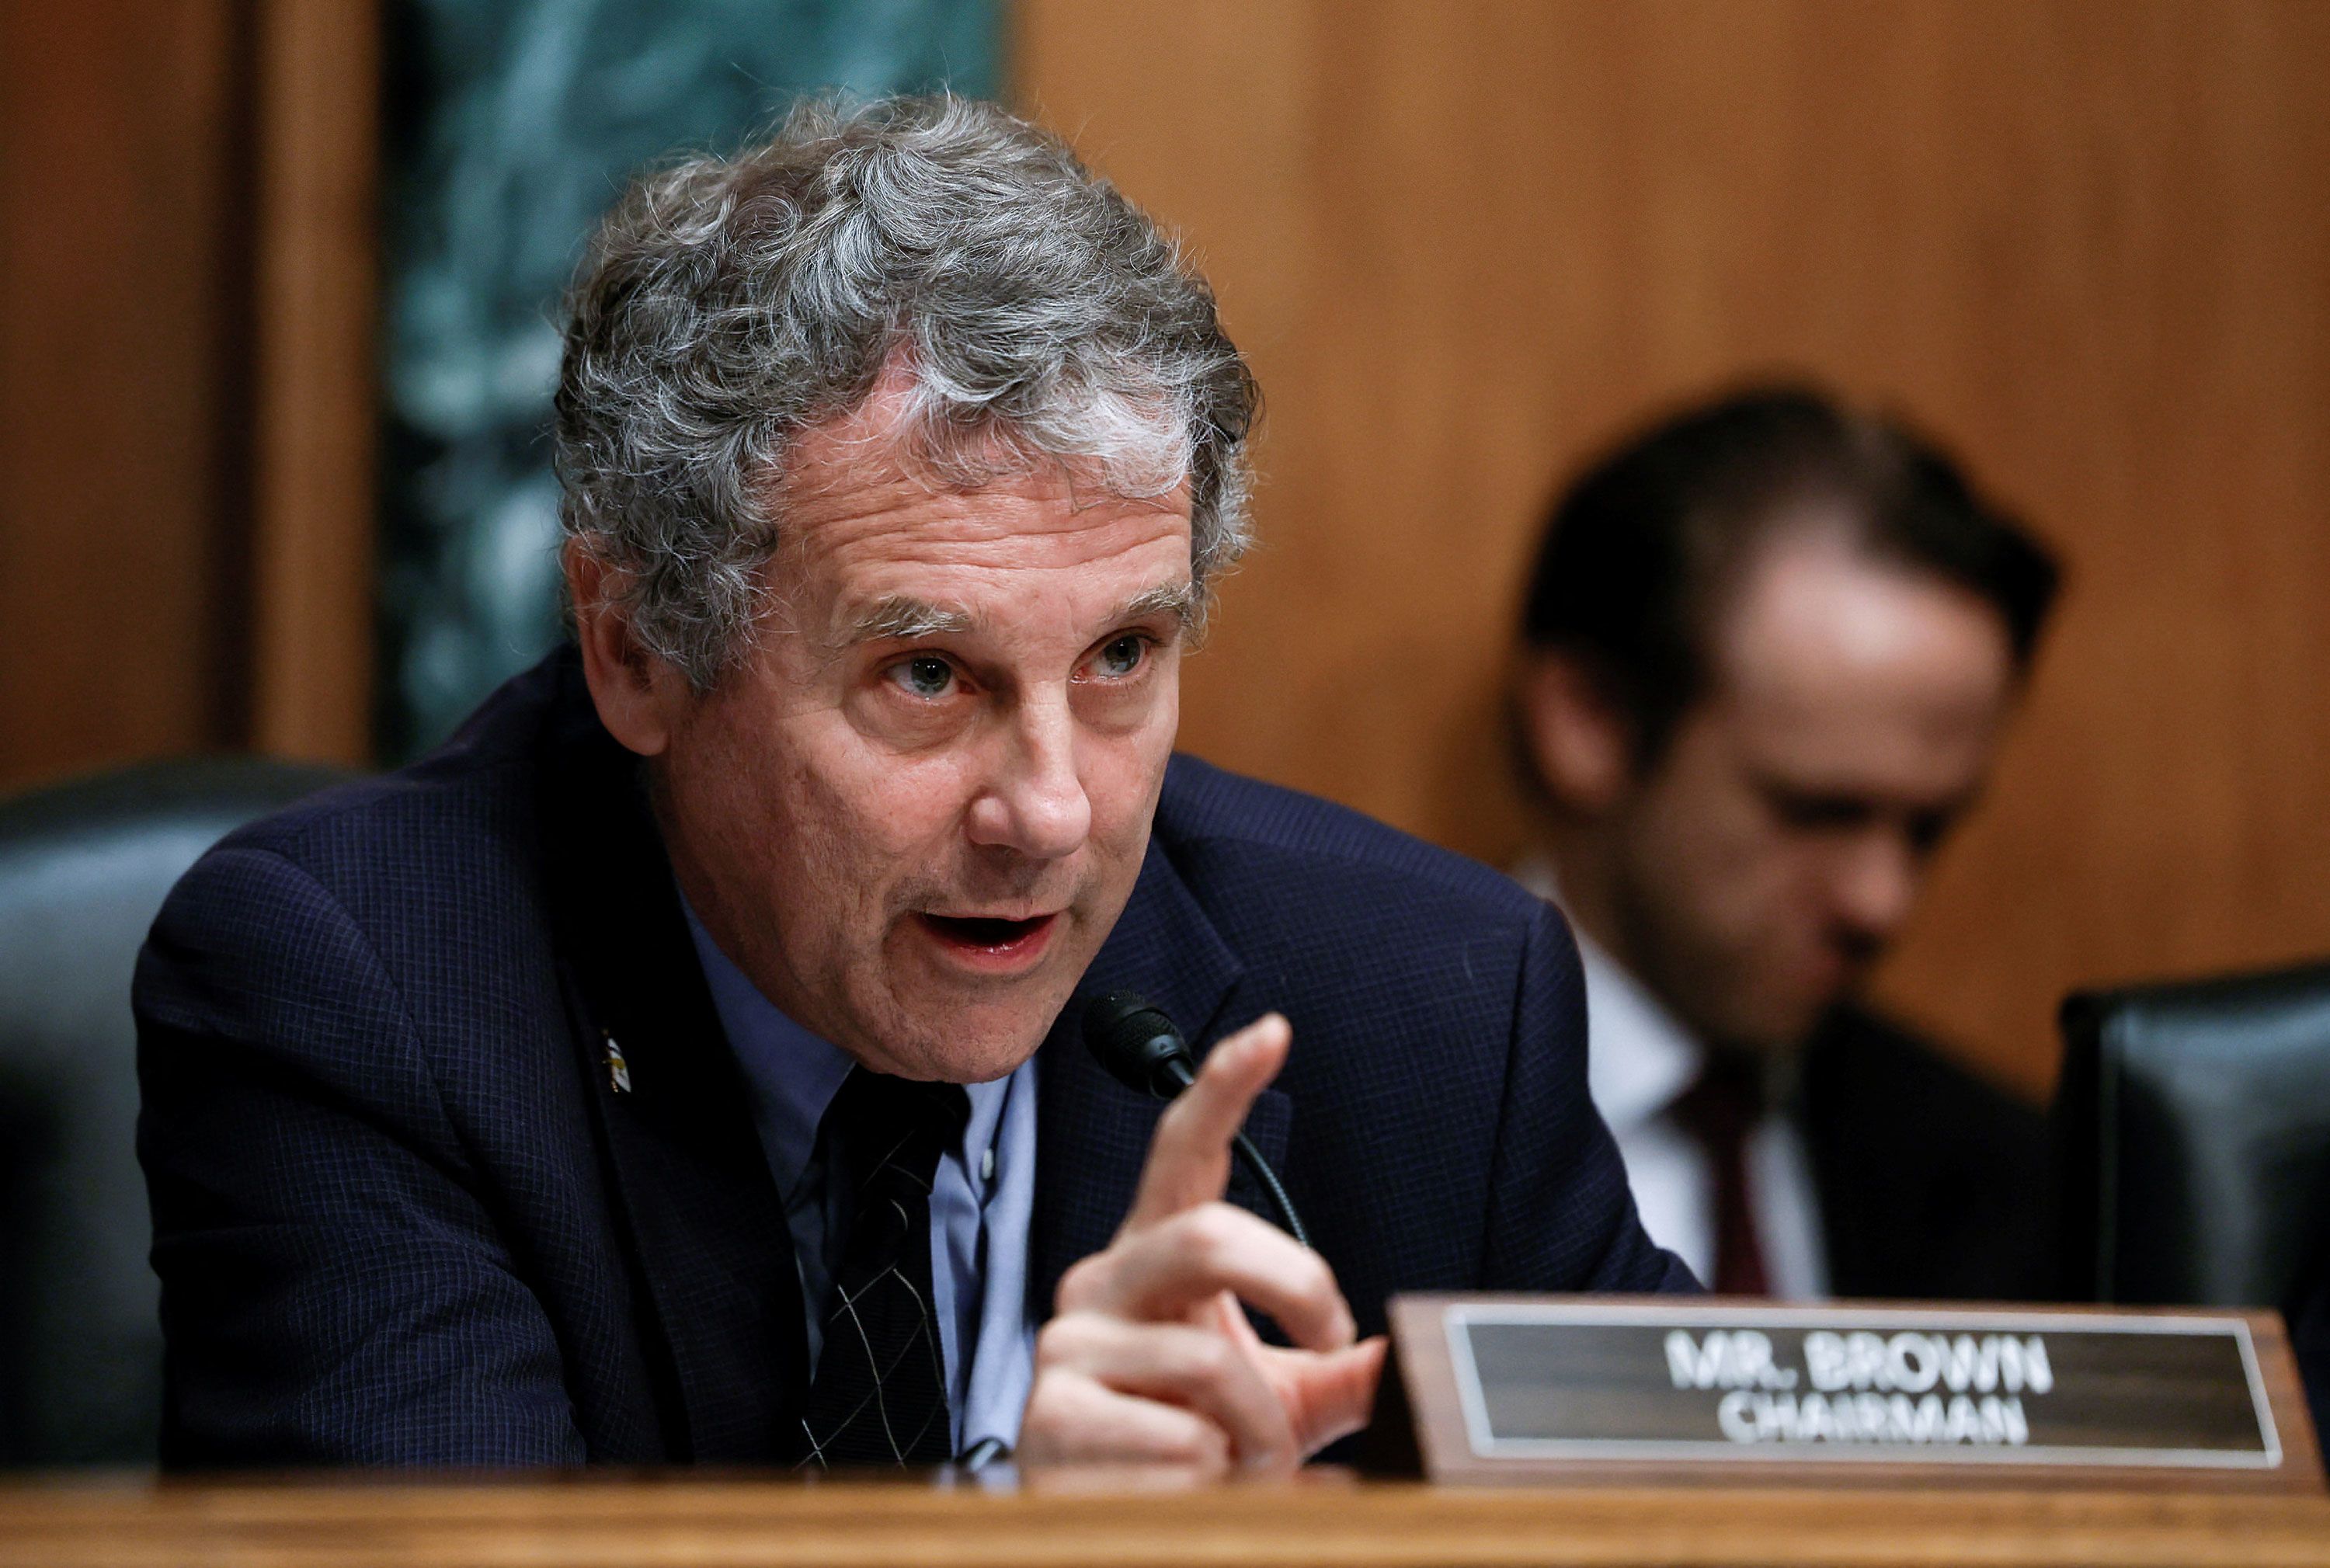 U.S. Senator Sherrod Brown (D-OH) qustions Securities and Exchange Commission (SEC) Chairman Gary Gensler, during a Senate Banking, Housing and Urban Affairs Committee oversight hearing on Capitol Hill in Washington, U.S., September 15, 2022. REUTERS/Evelyn Hockstein